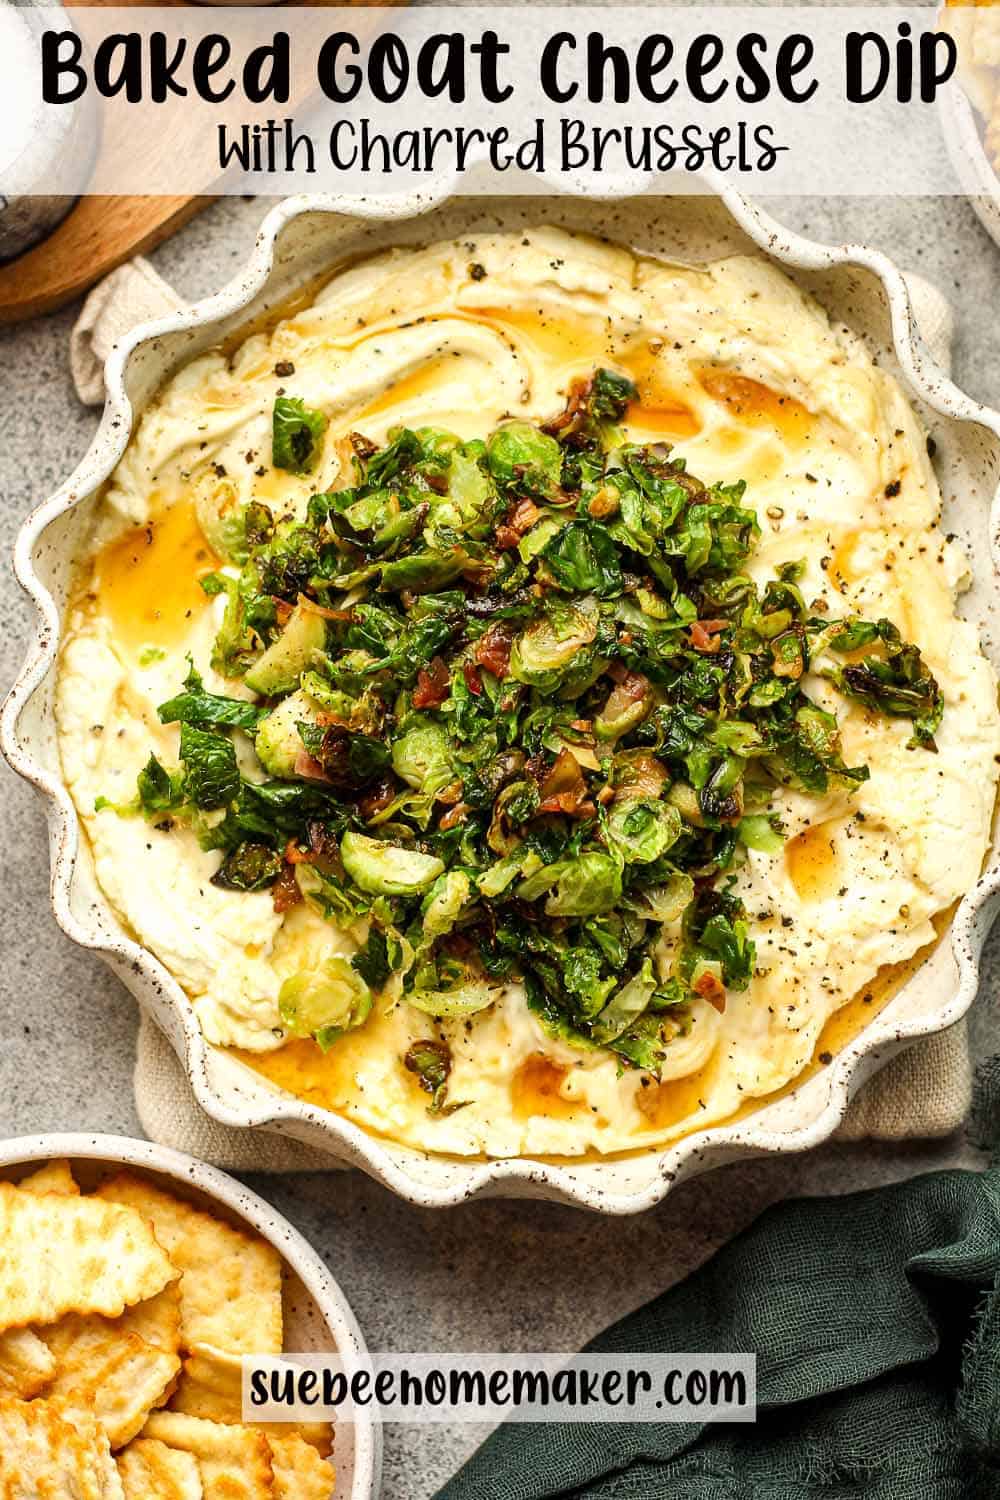 A pie plate of baked goat cheese dip with charred brussels.